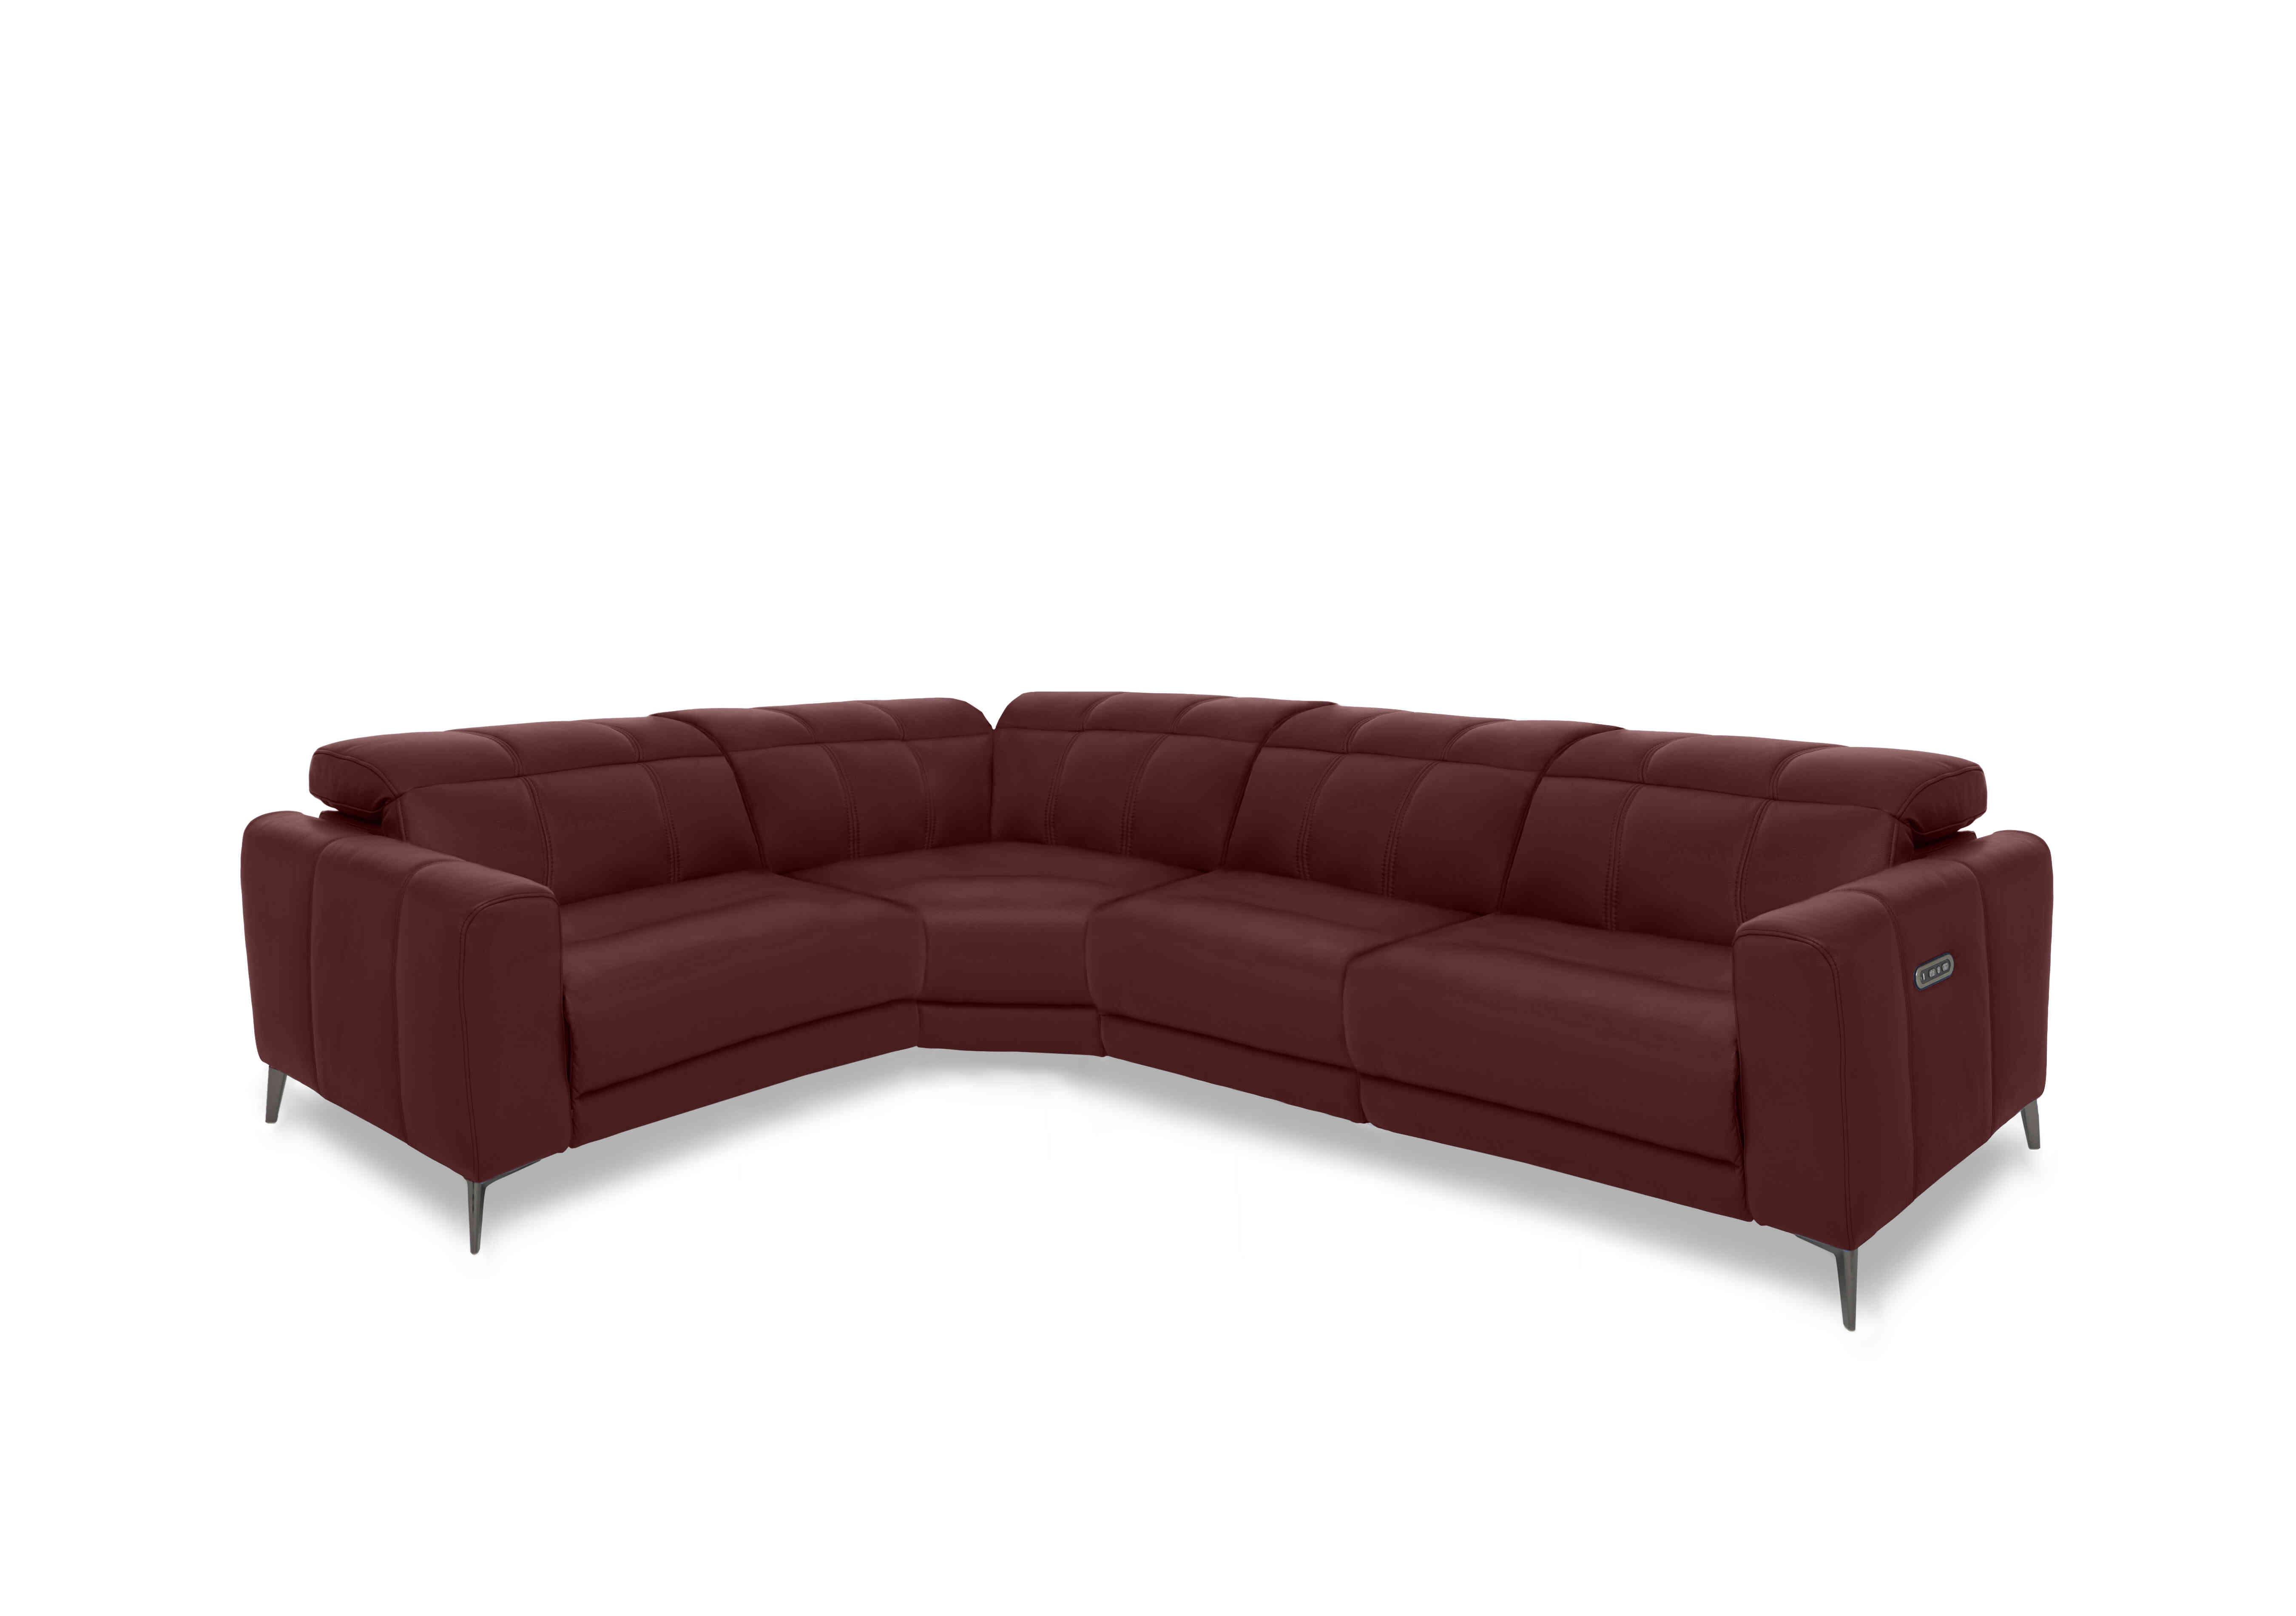 Ezra Leather Power Recliner Corner Sofa with Power Headrests in Cat-60/15 Ruby on Furniture Village